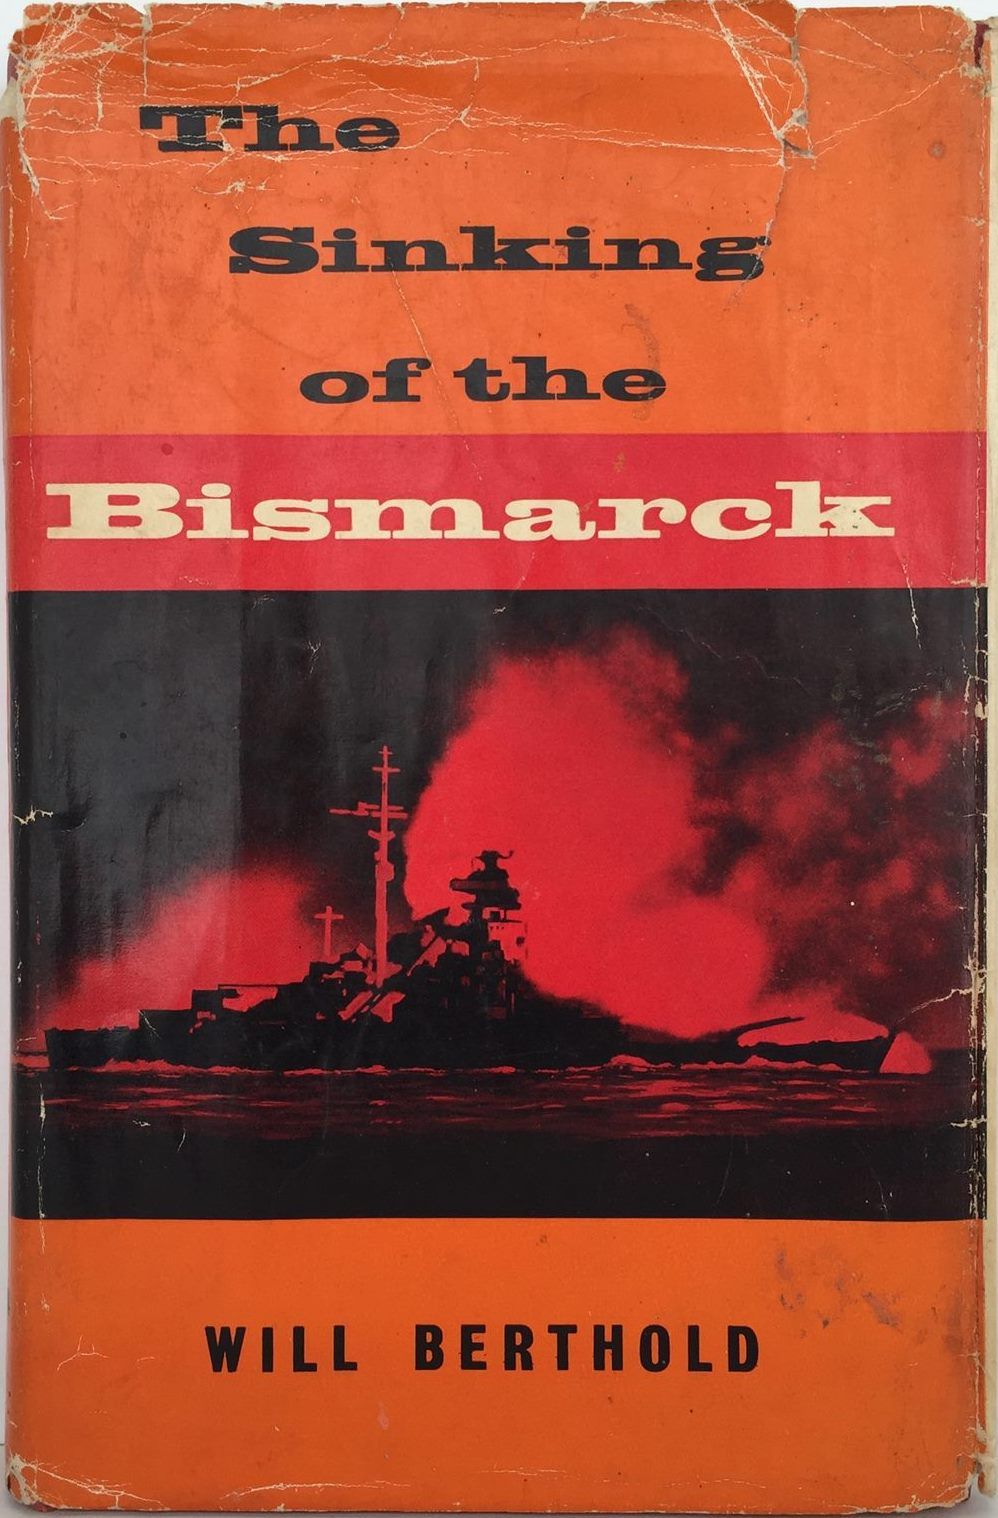 THE SINKING OF THE BISMARCK